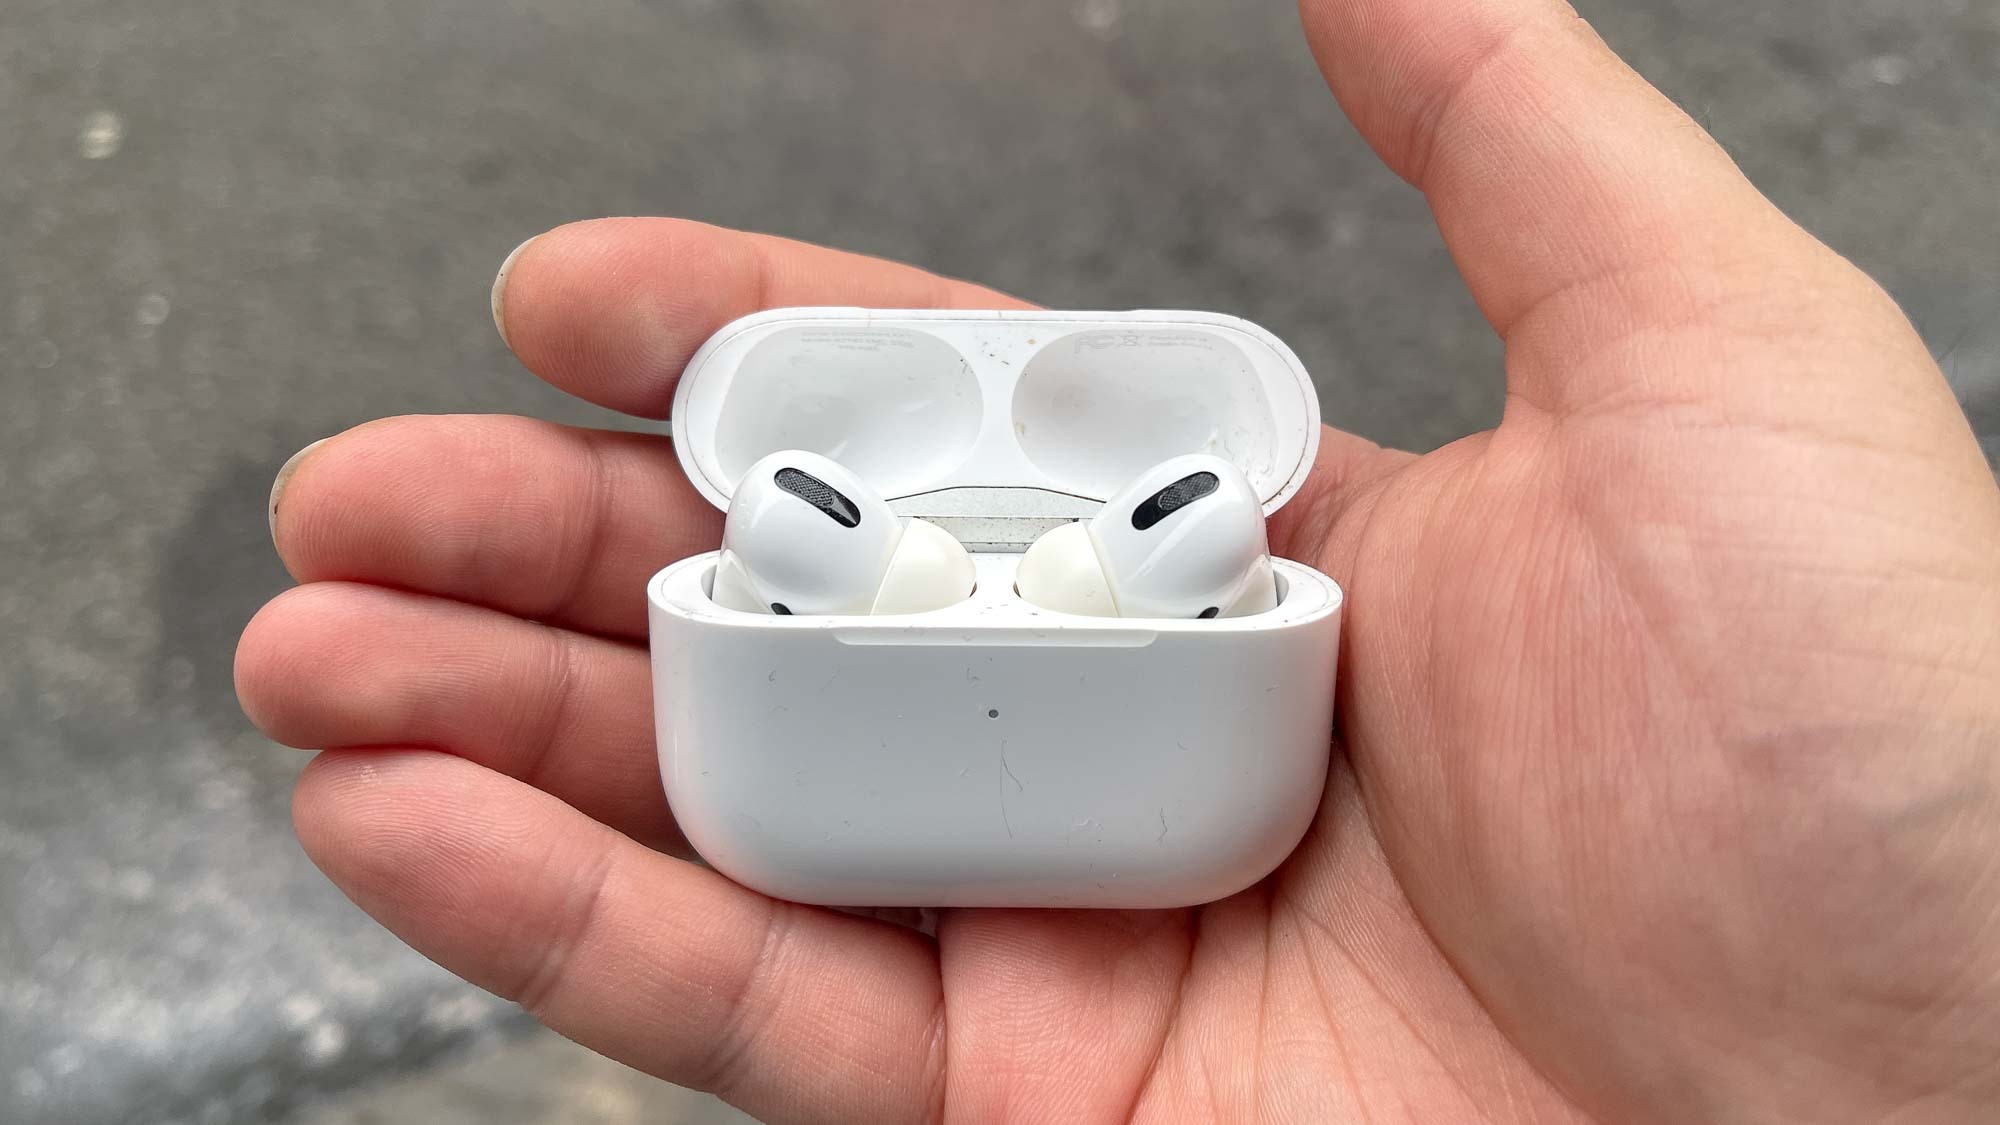 The AirPods Pro charging case being held in hand